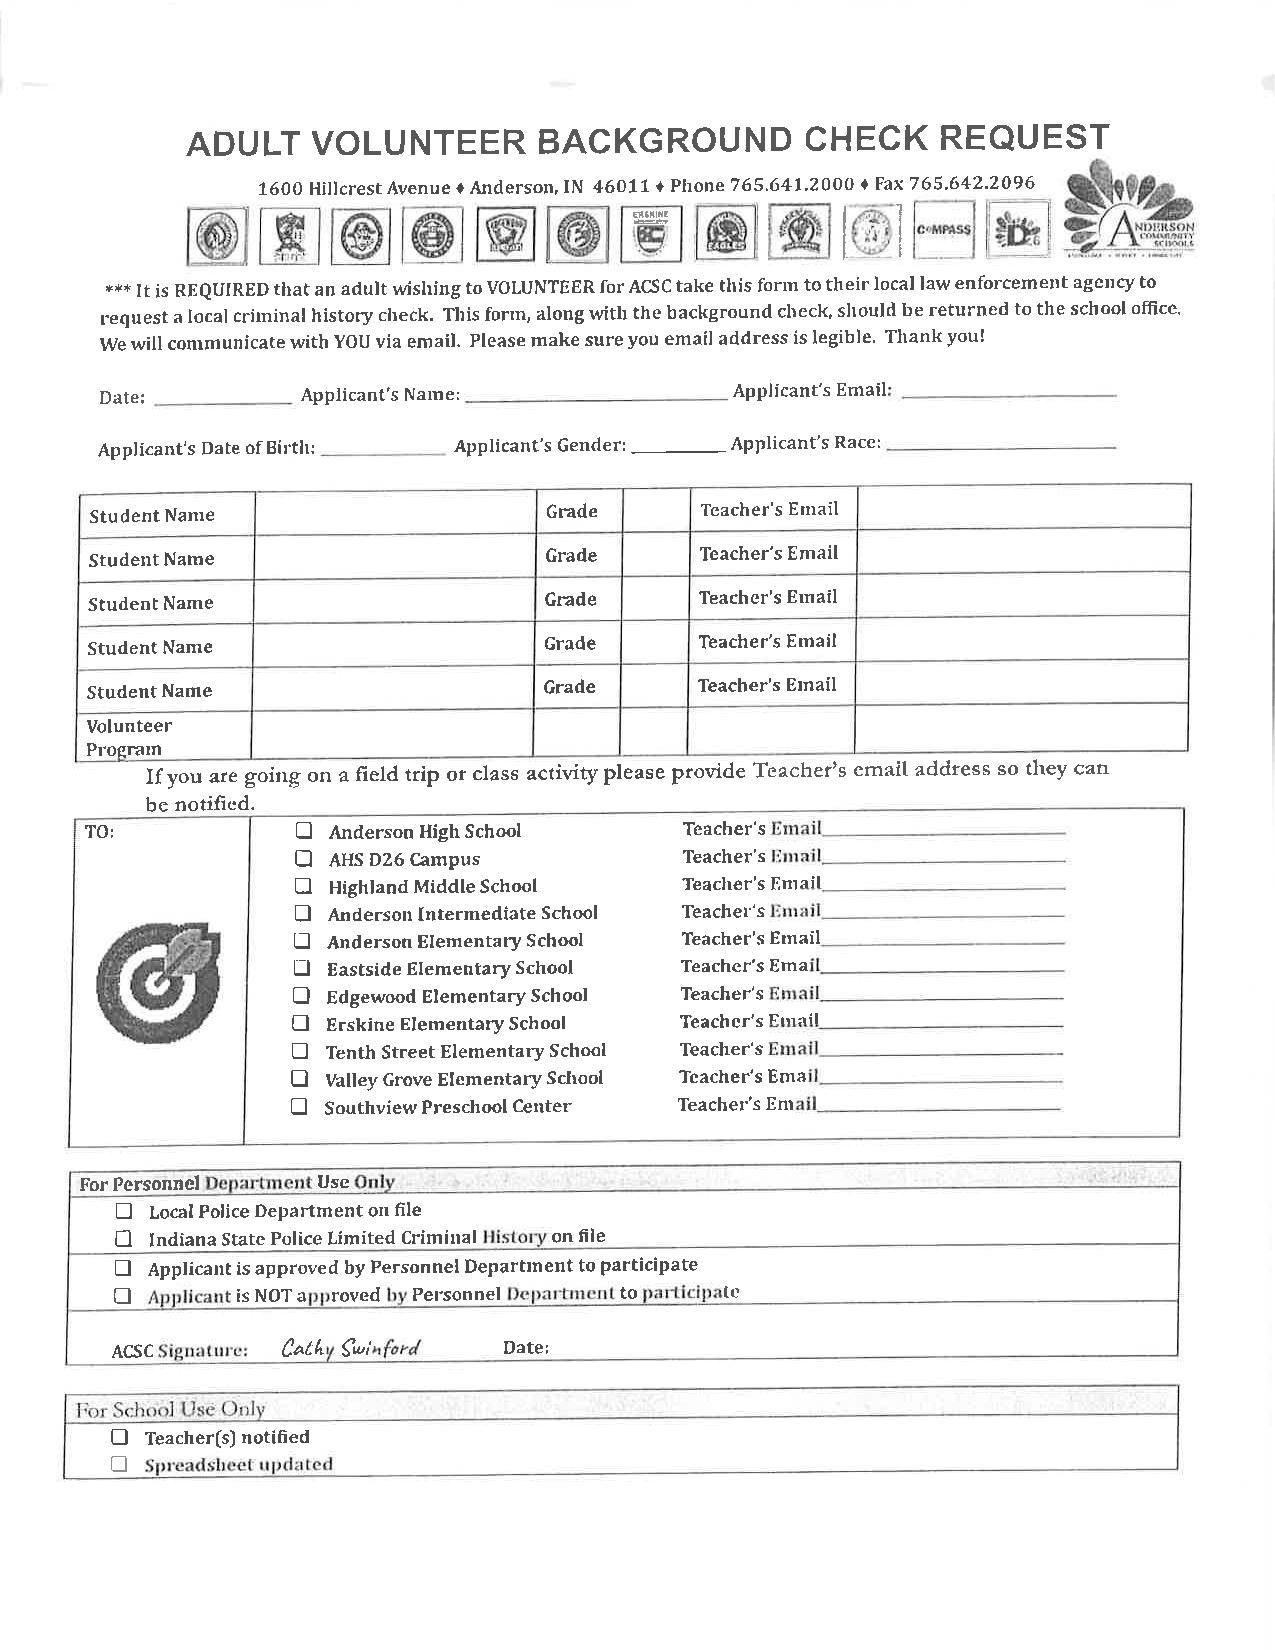 ACS Background Check form